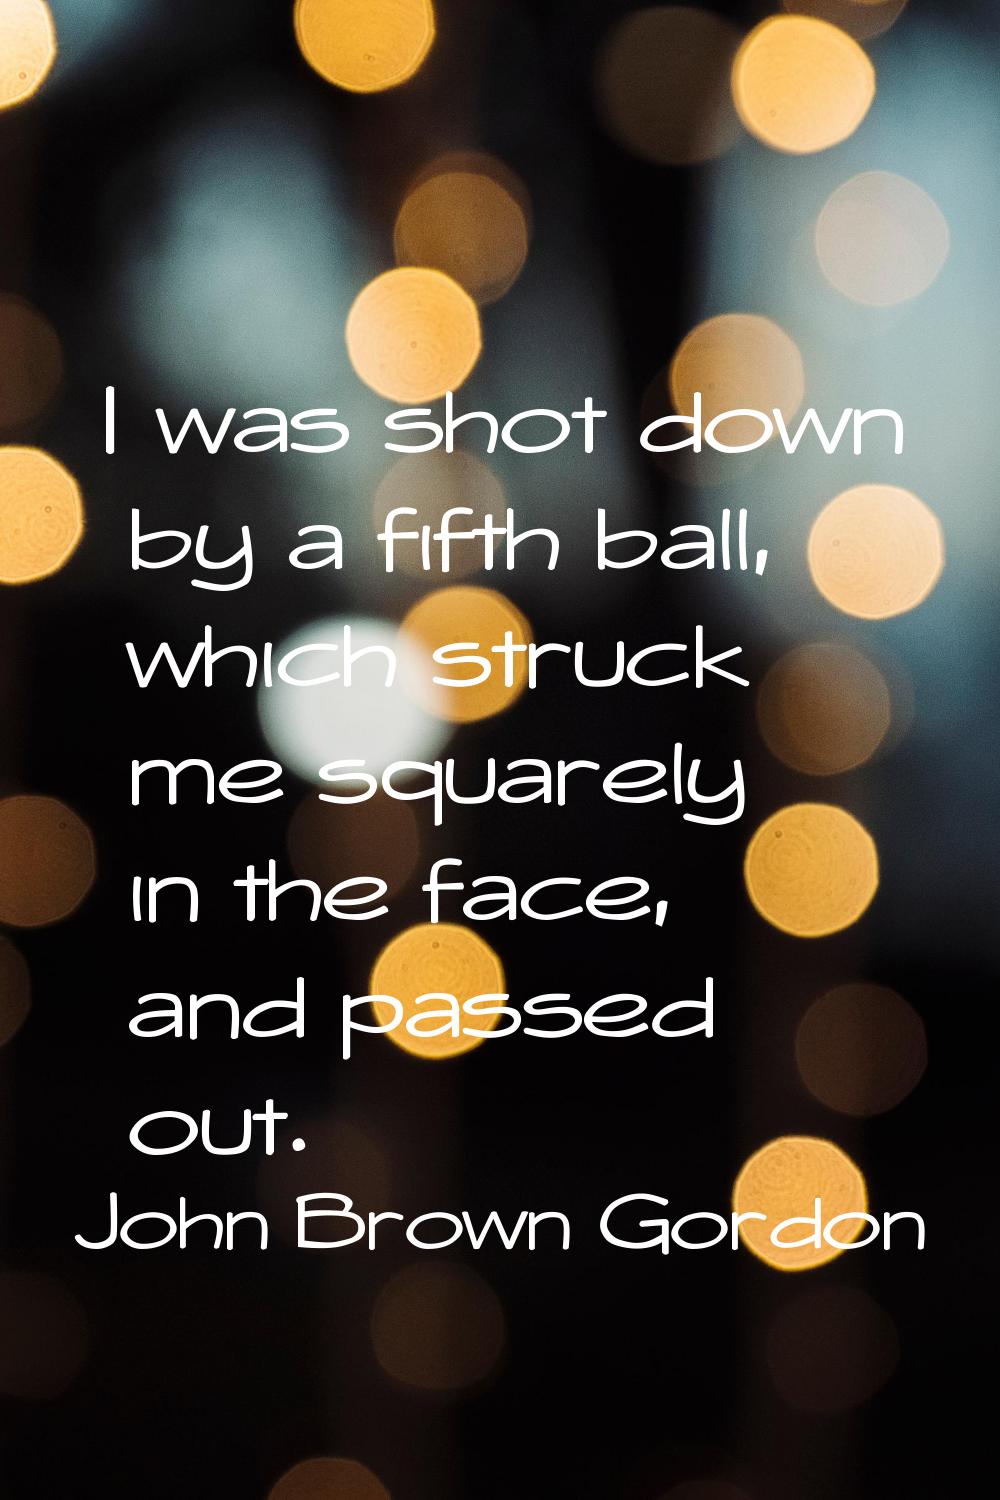 I was shot down by a fifth ball, which struck me squarely in the face, and passed out.